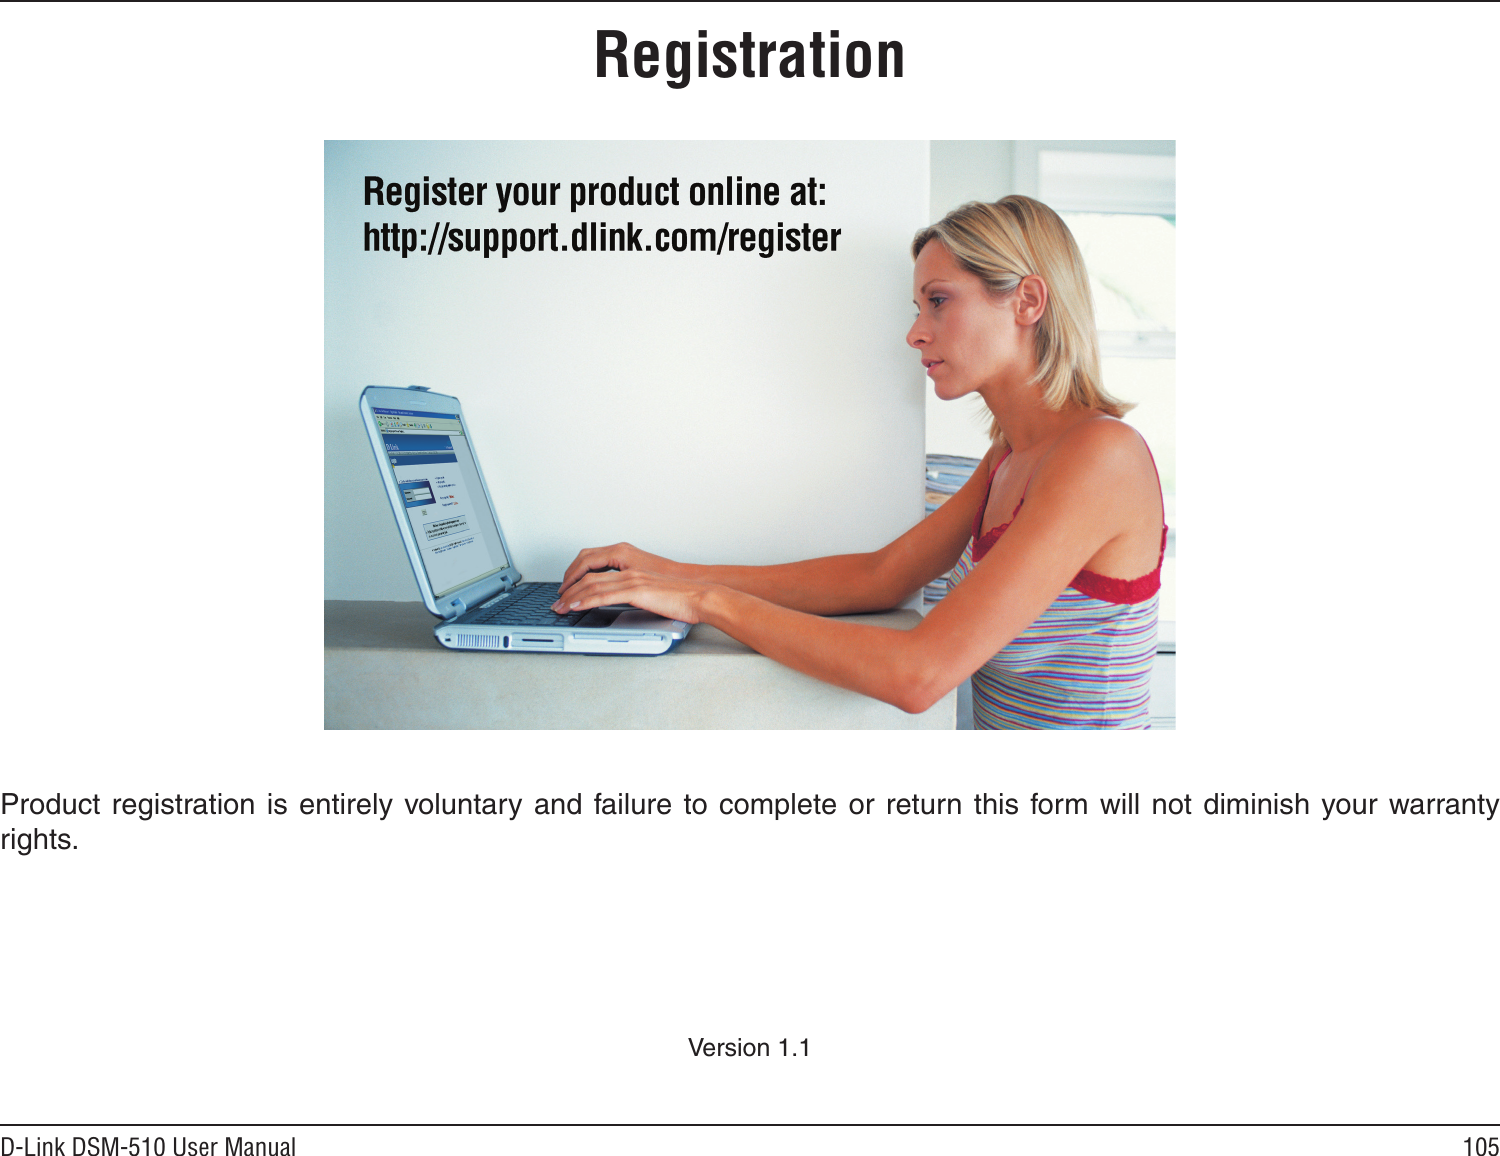 105D-Link DSM-510 User ManualVersion 1.1Product registration is  entirely  voluntary and failure to complete or return this form will not diminish your warranty rights.Registration